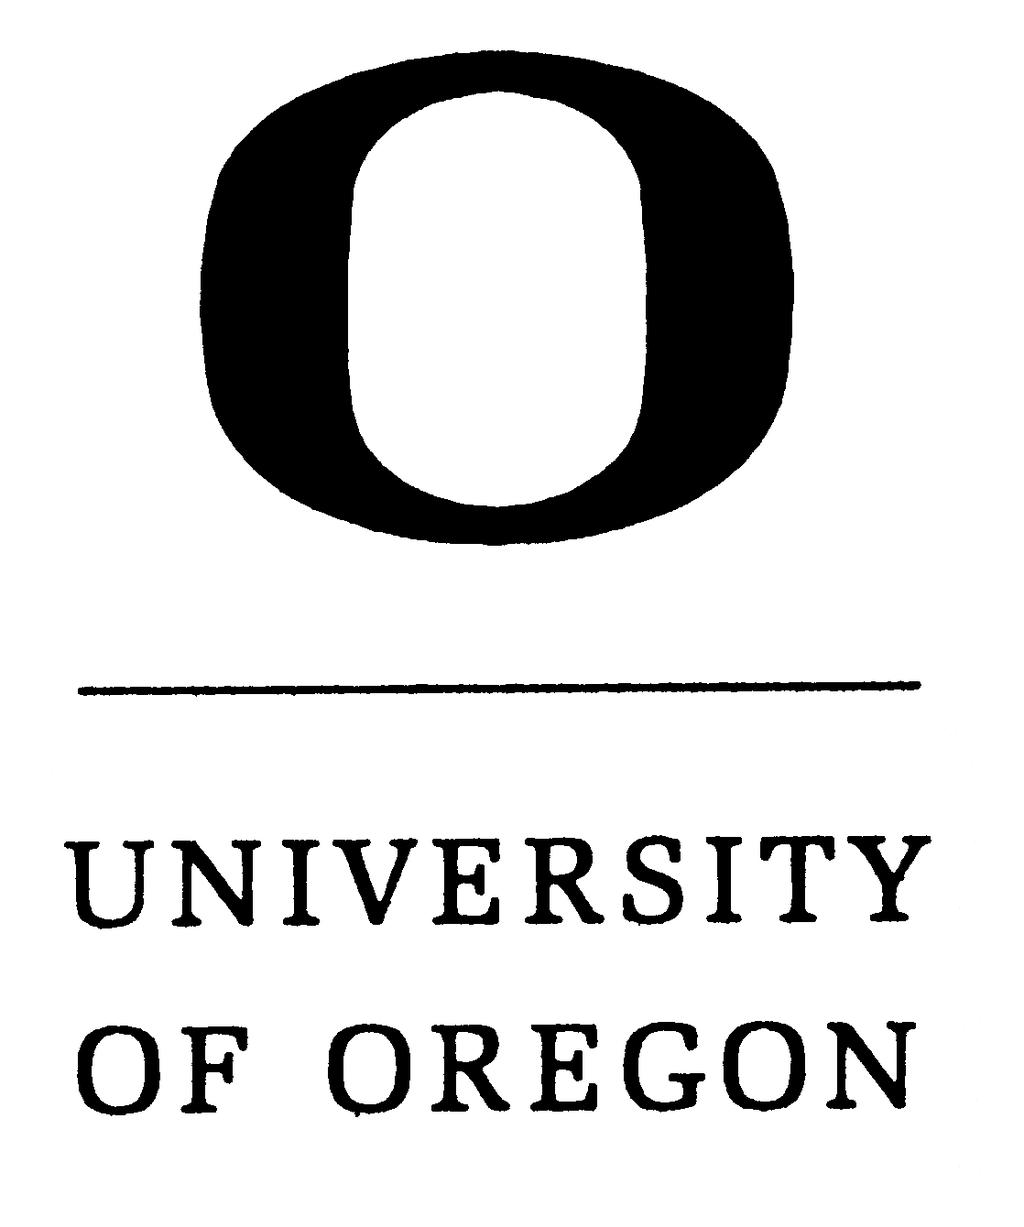 University of Oregon School of Music and Dance Graduate Audition Requirements 2014-15 GRADUATE AUDITION REQUIREMENTS The purpose of the entrance audition is to provide an opportunity for you to